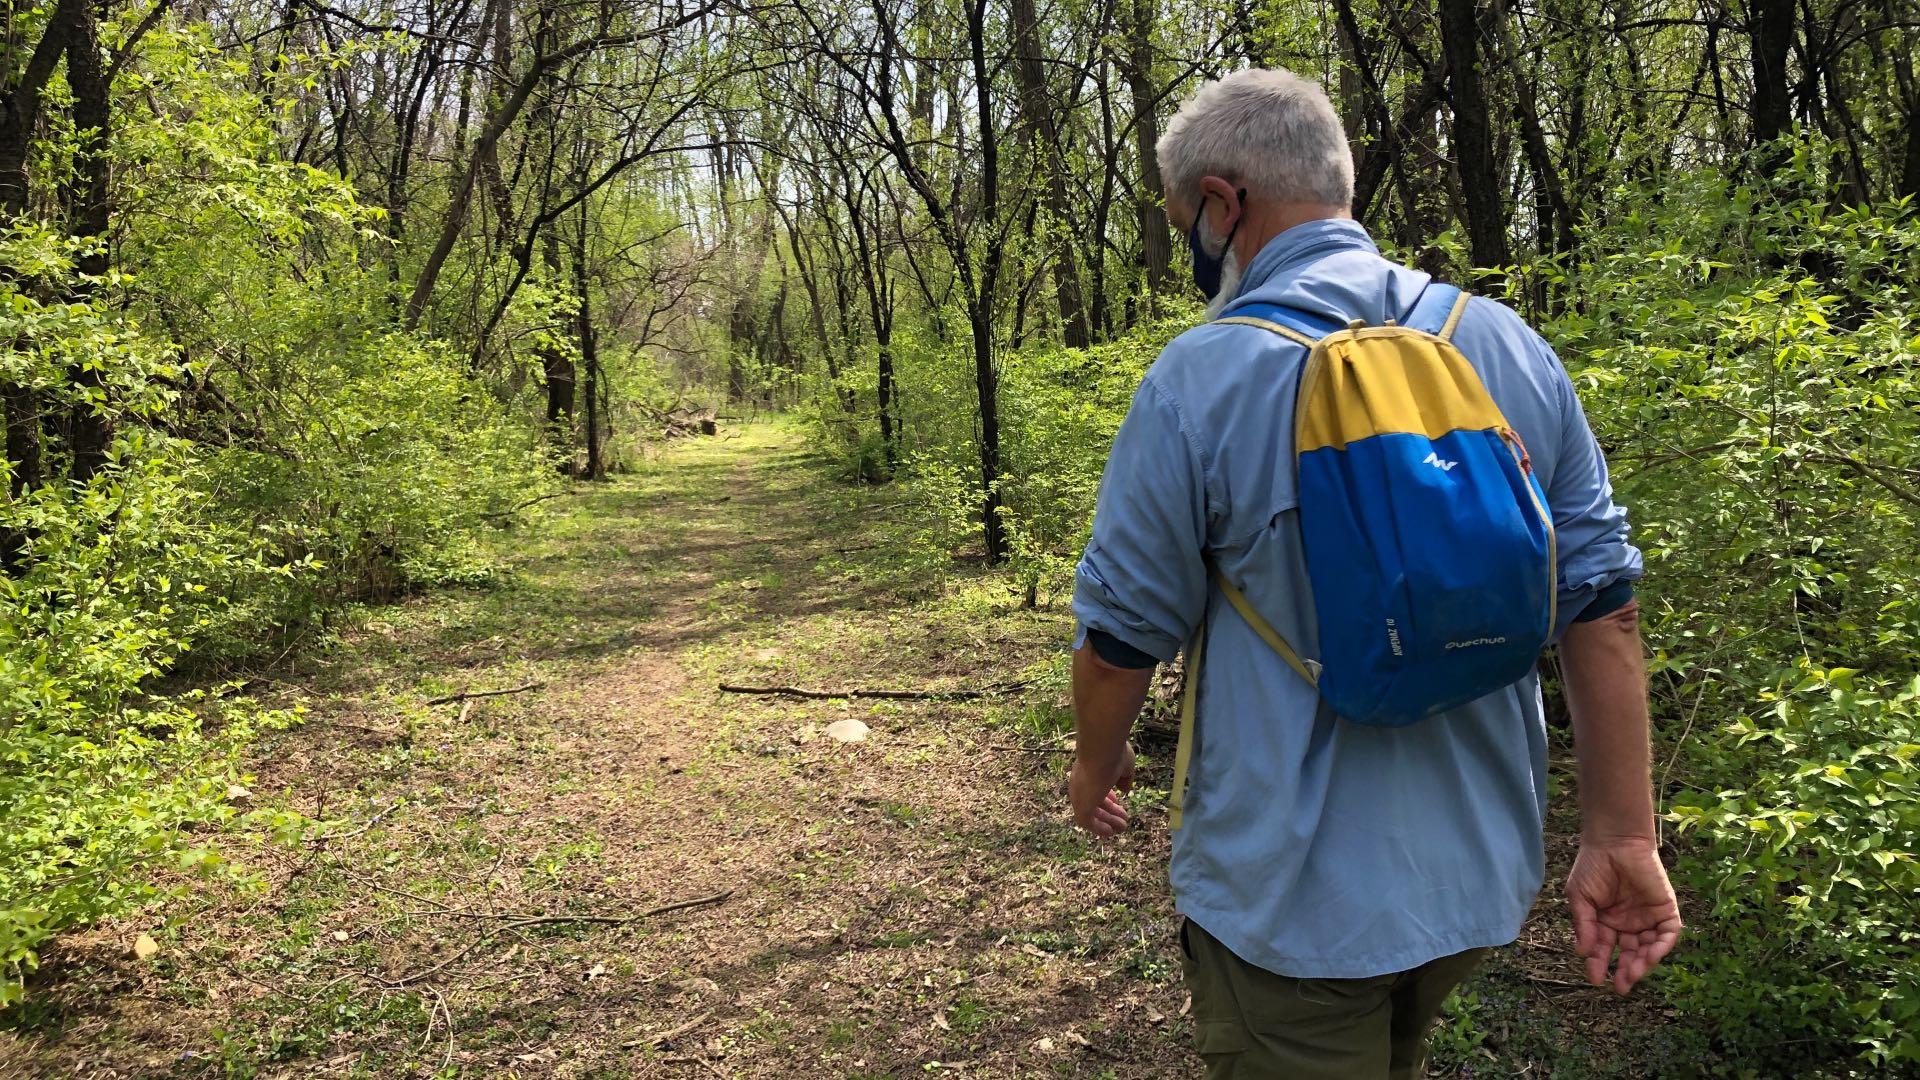 Liam Durnan hikes in Cook County’s Spring Lake Nature Preserve. (Patty Wetli / WTTW News)